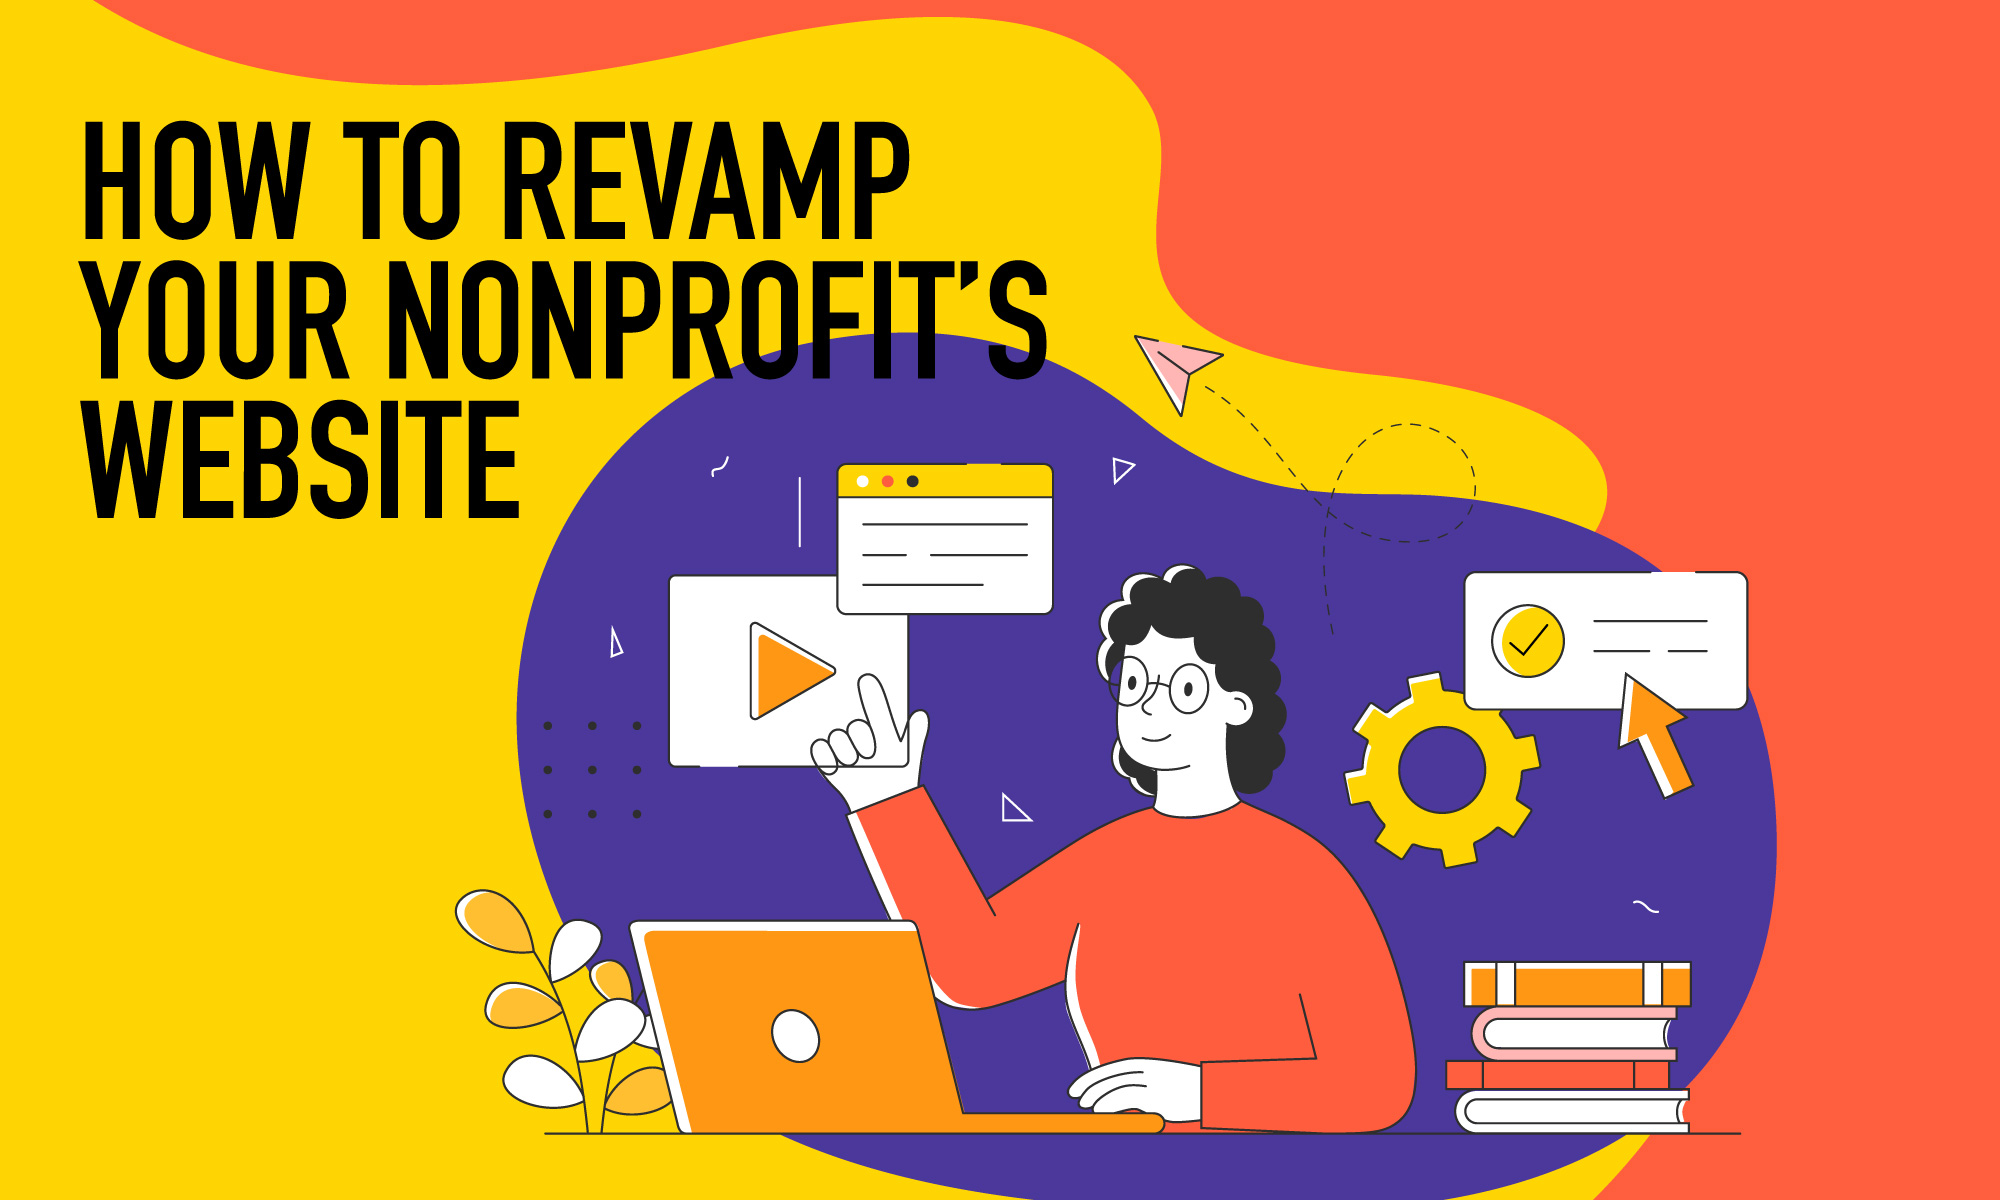 Text: "How to Revamp Your Nonprofit's Website."